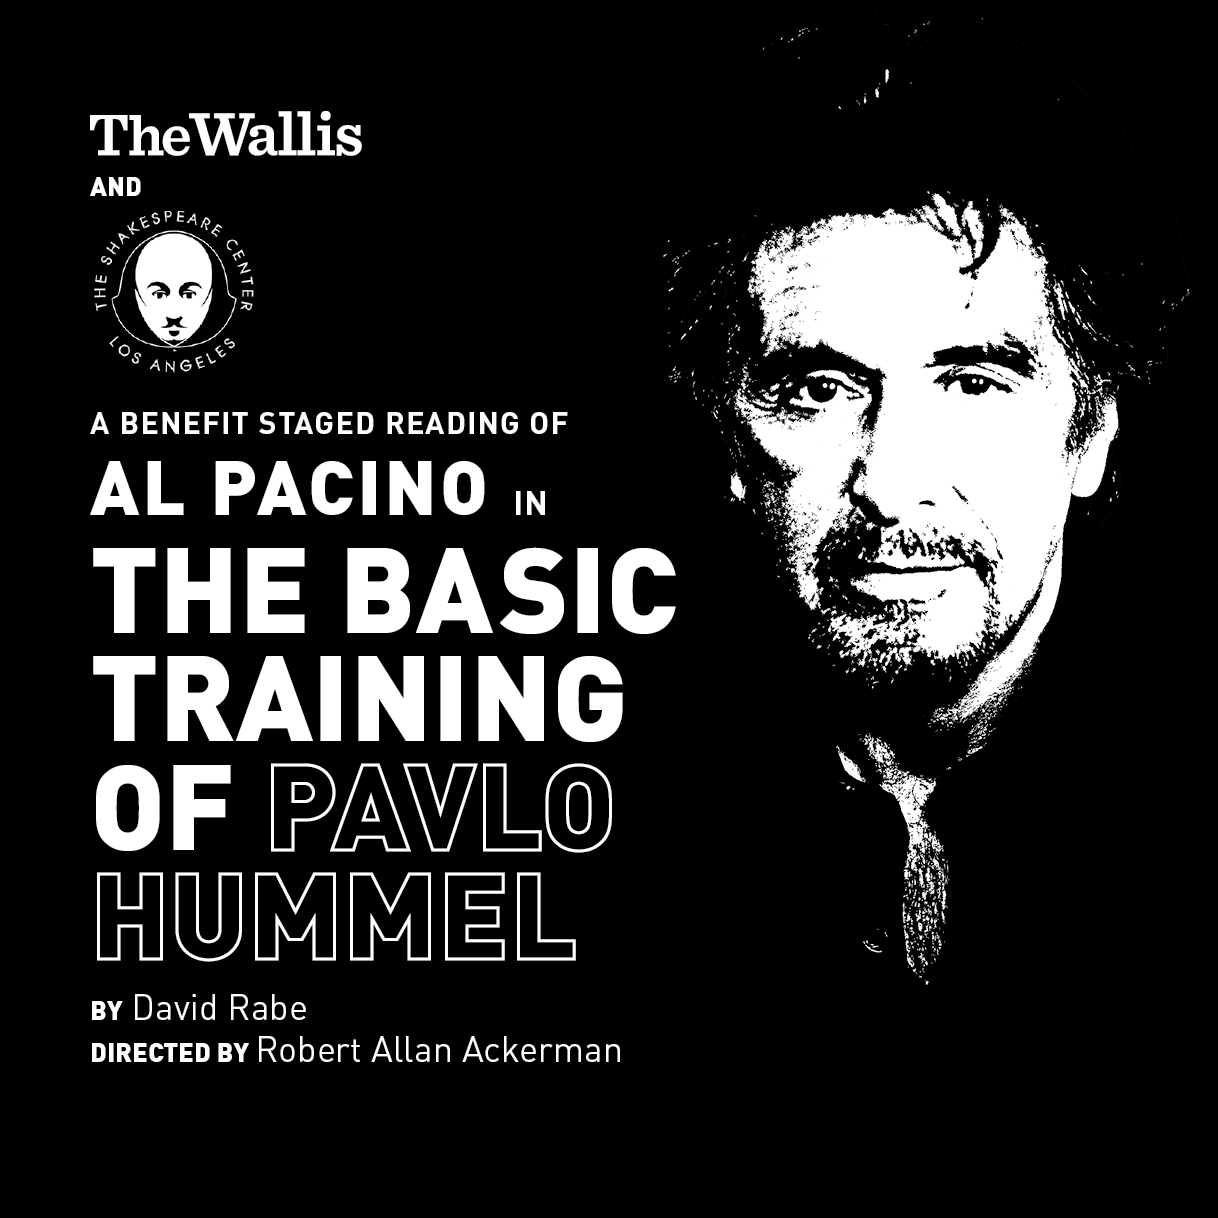 AL PACINO in a Benefit Staged Reading of THE BASIC TRAINING OF PAVLO HUMMEL